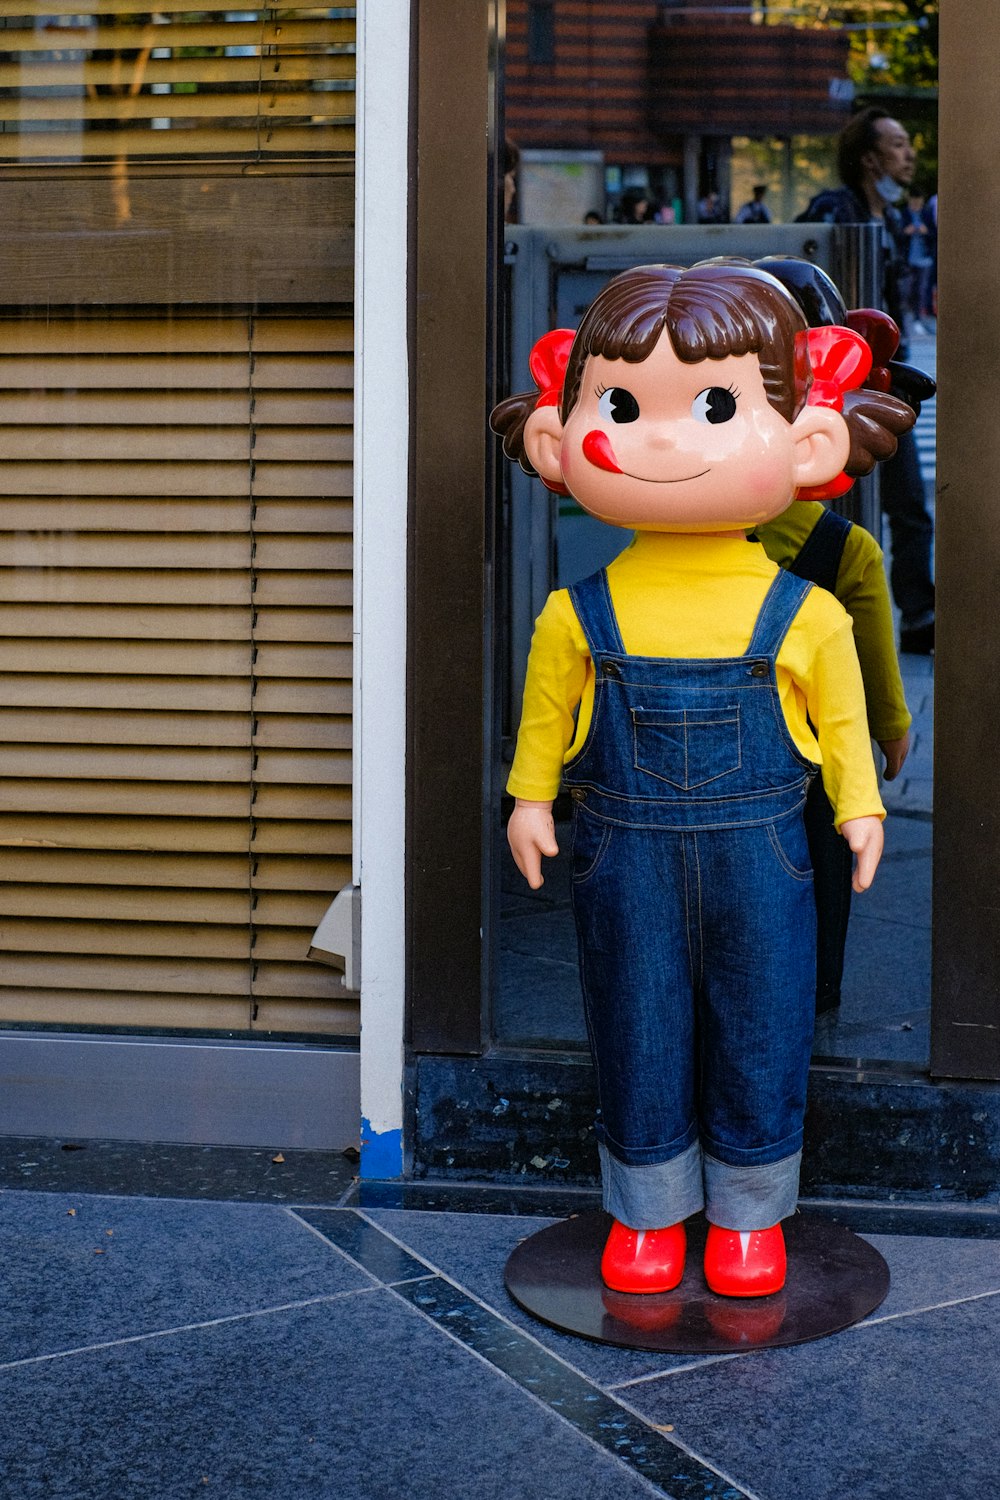 a statue of a girl wearing overalls and red shoes